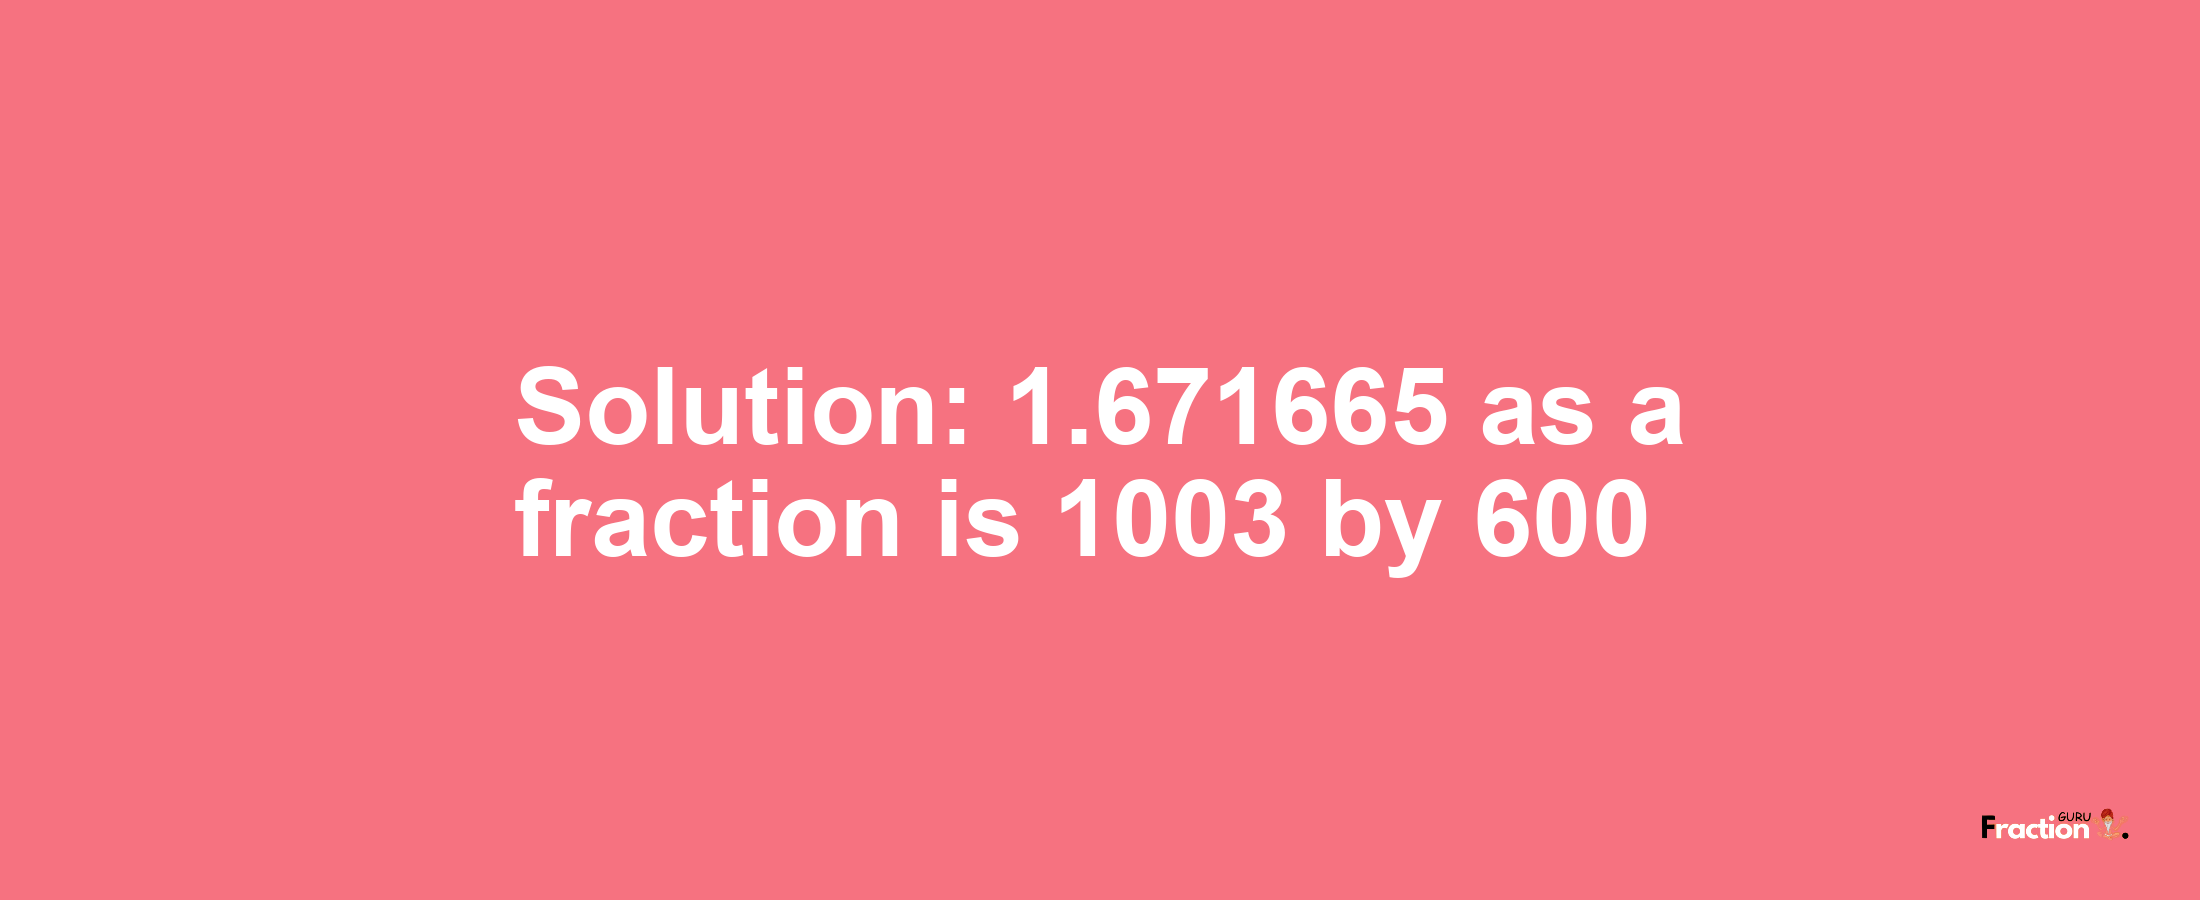 Solution:1.671665 as a fraction is 1003/600